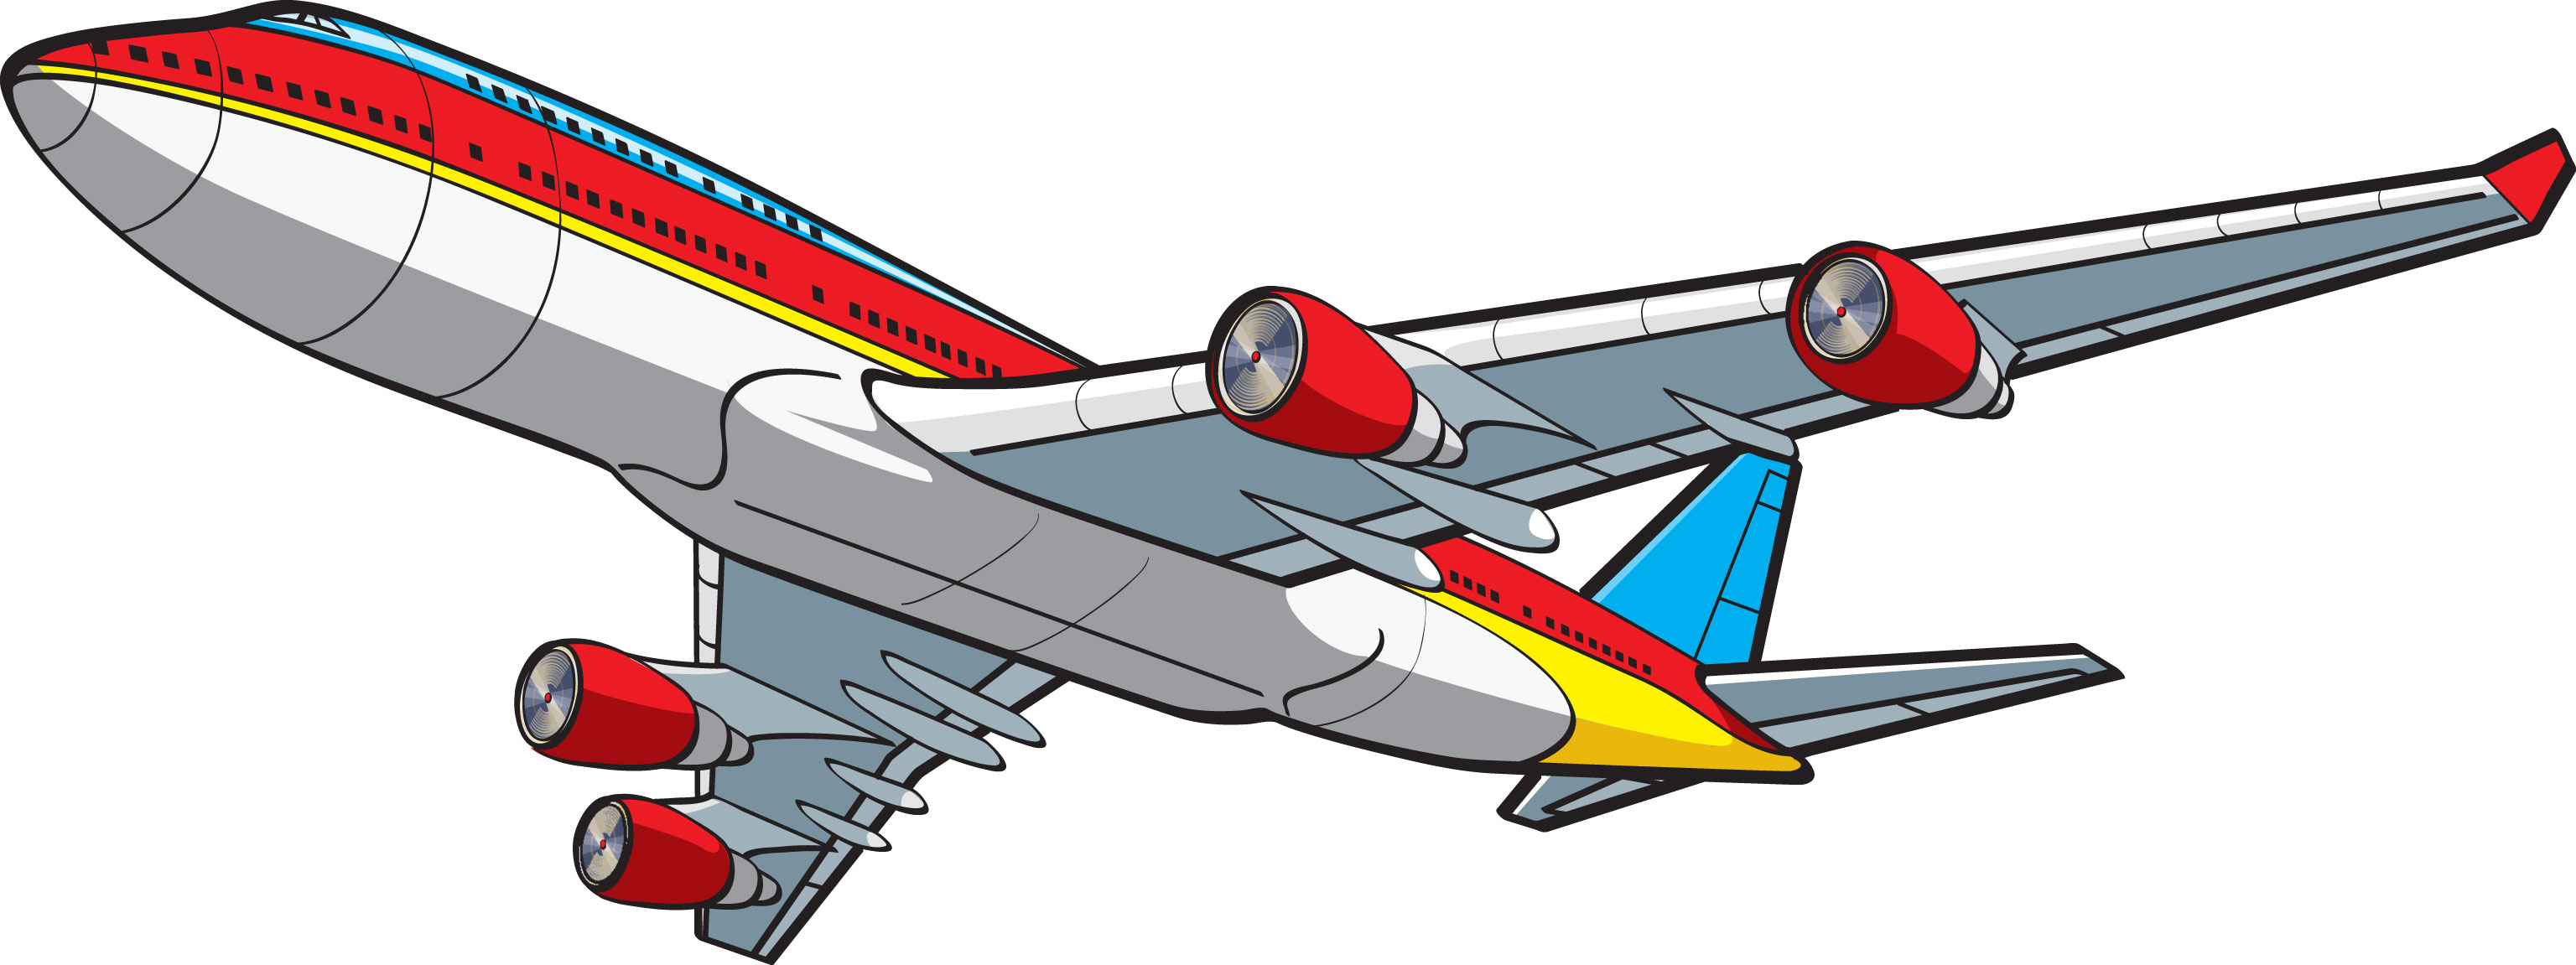 Clipart boeing 747.